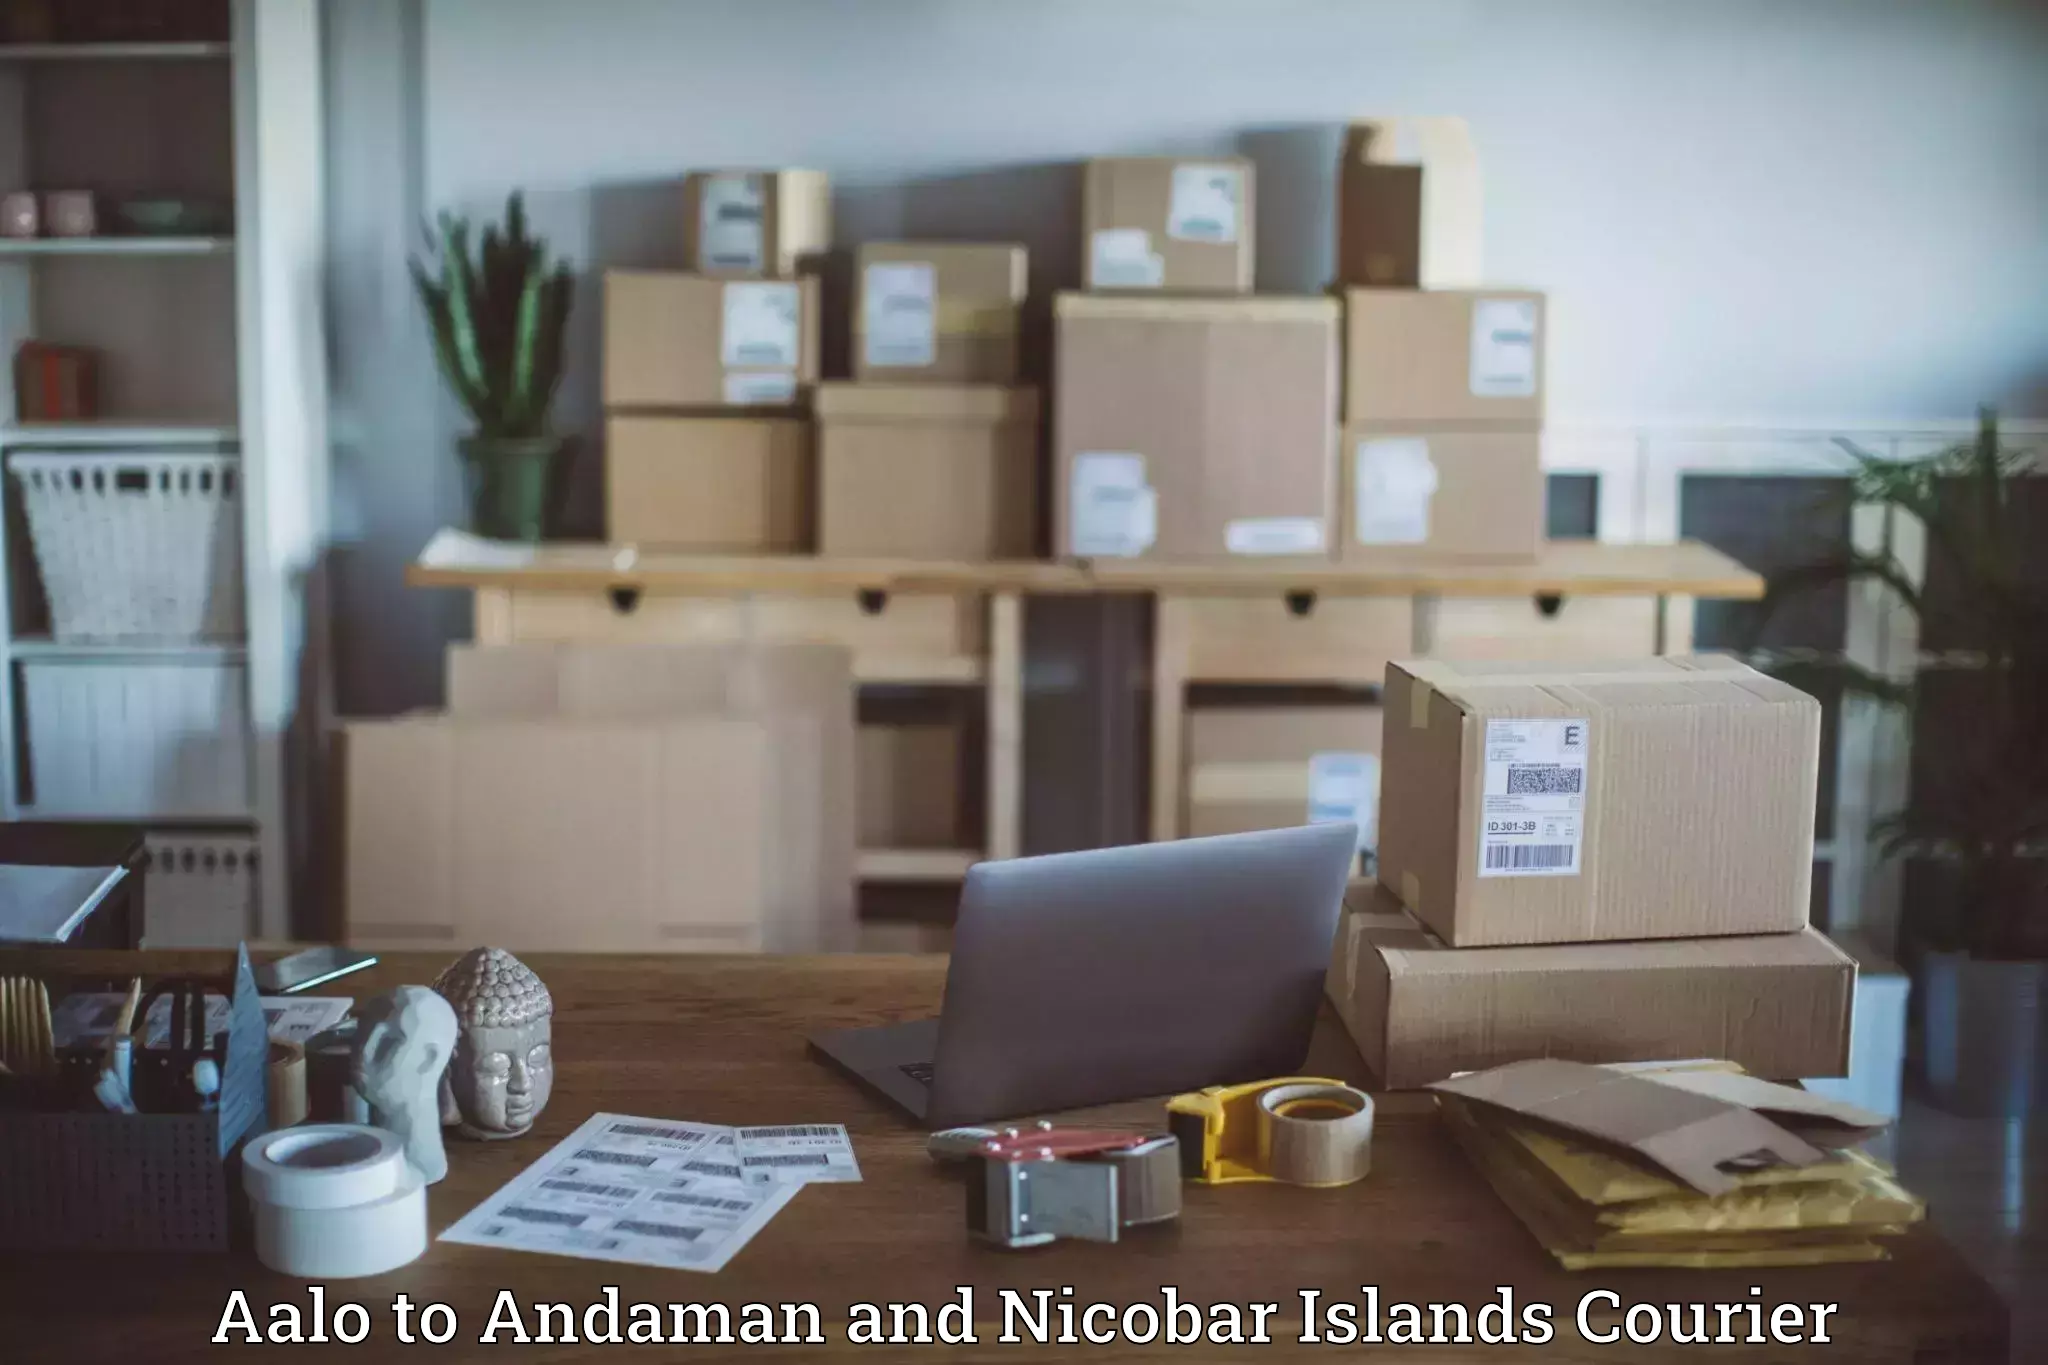 Urban courier service Aalo to Andaman and Nicobar Islands